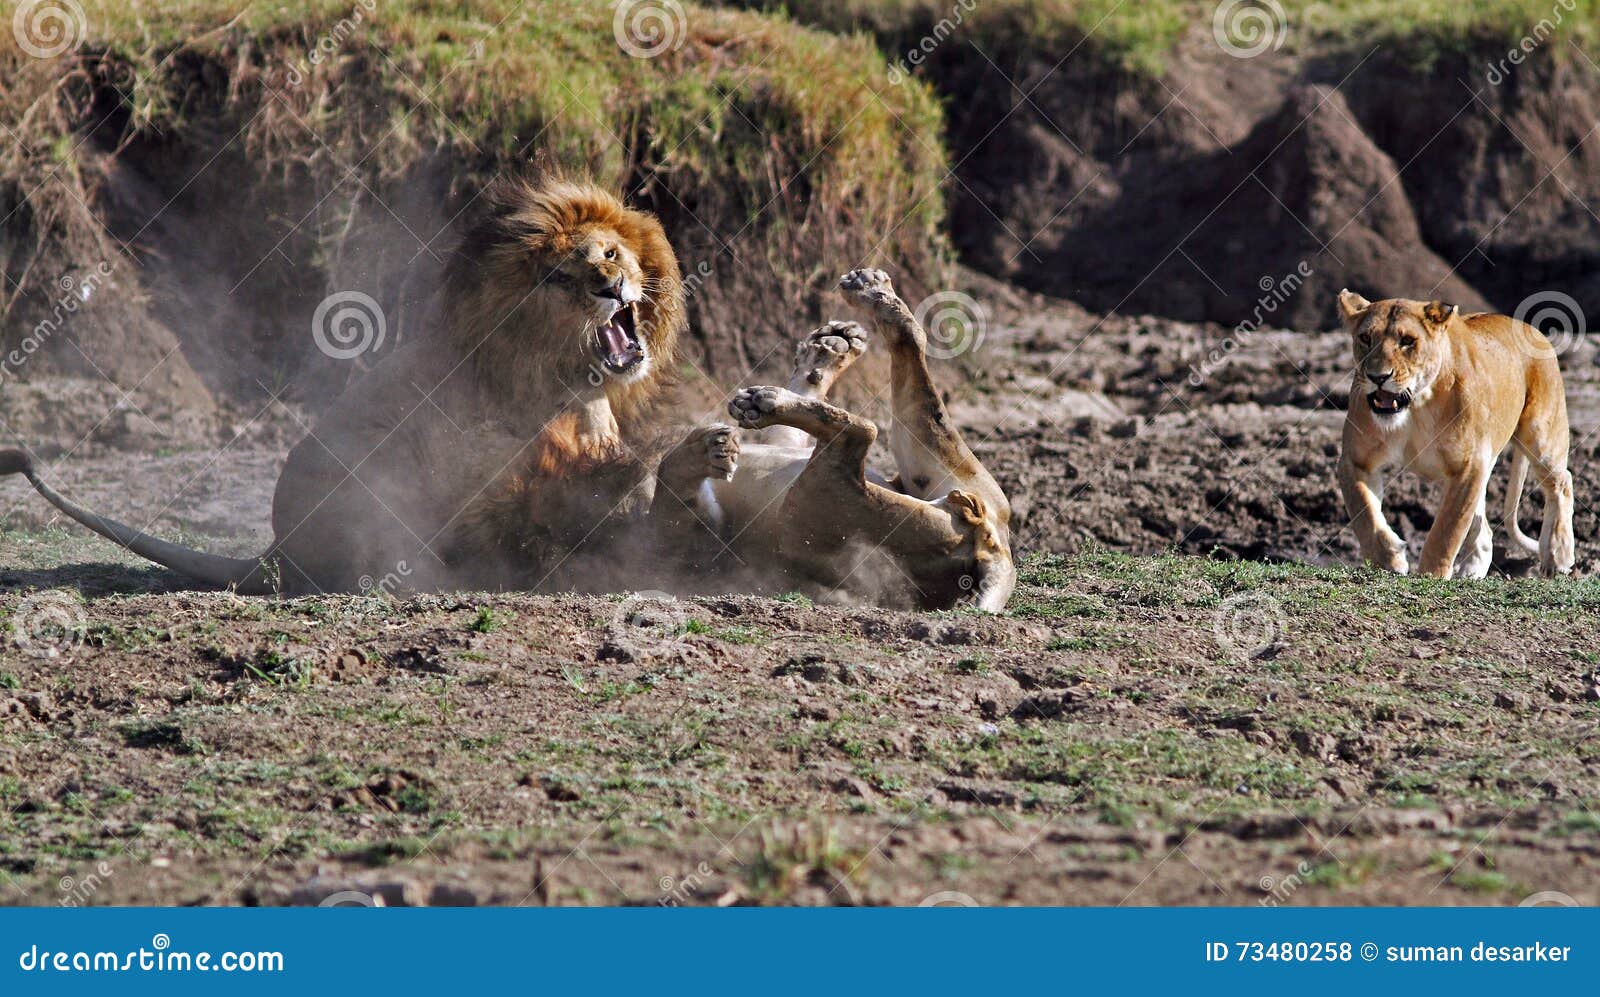 male lions fighting